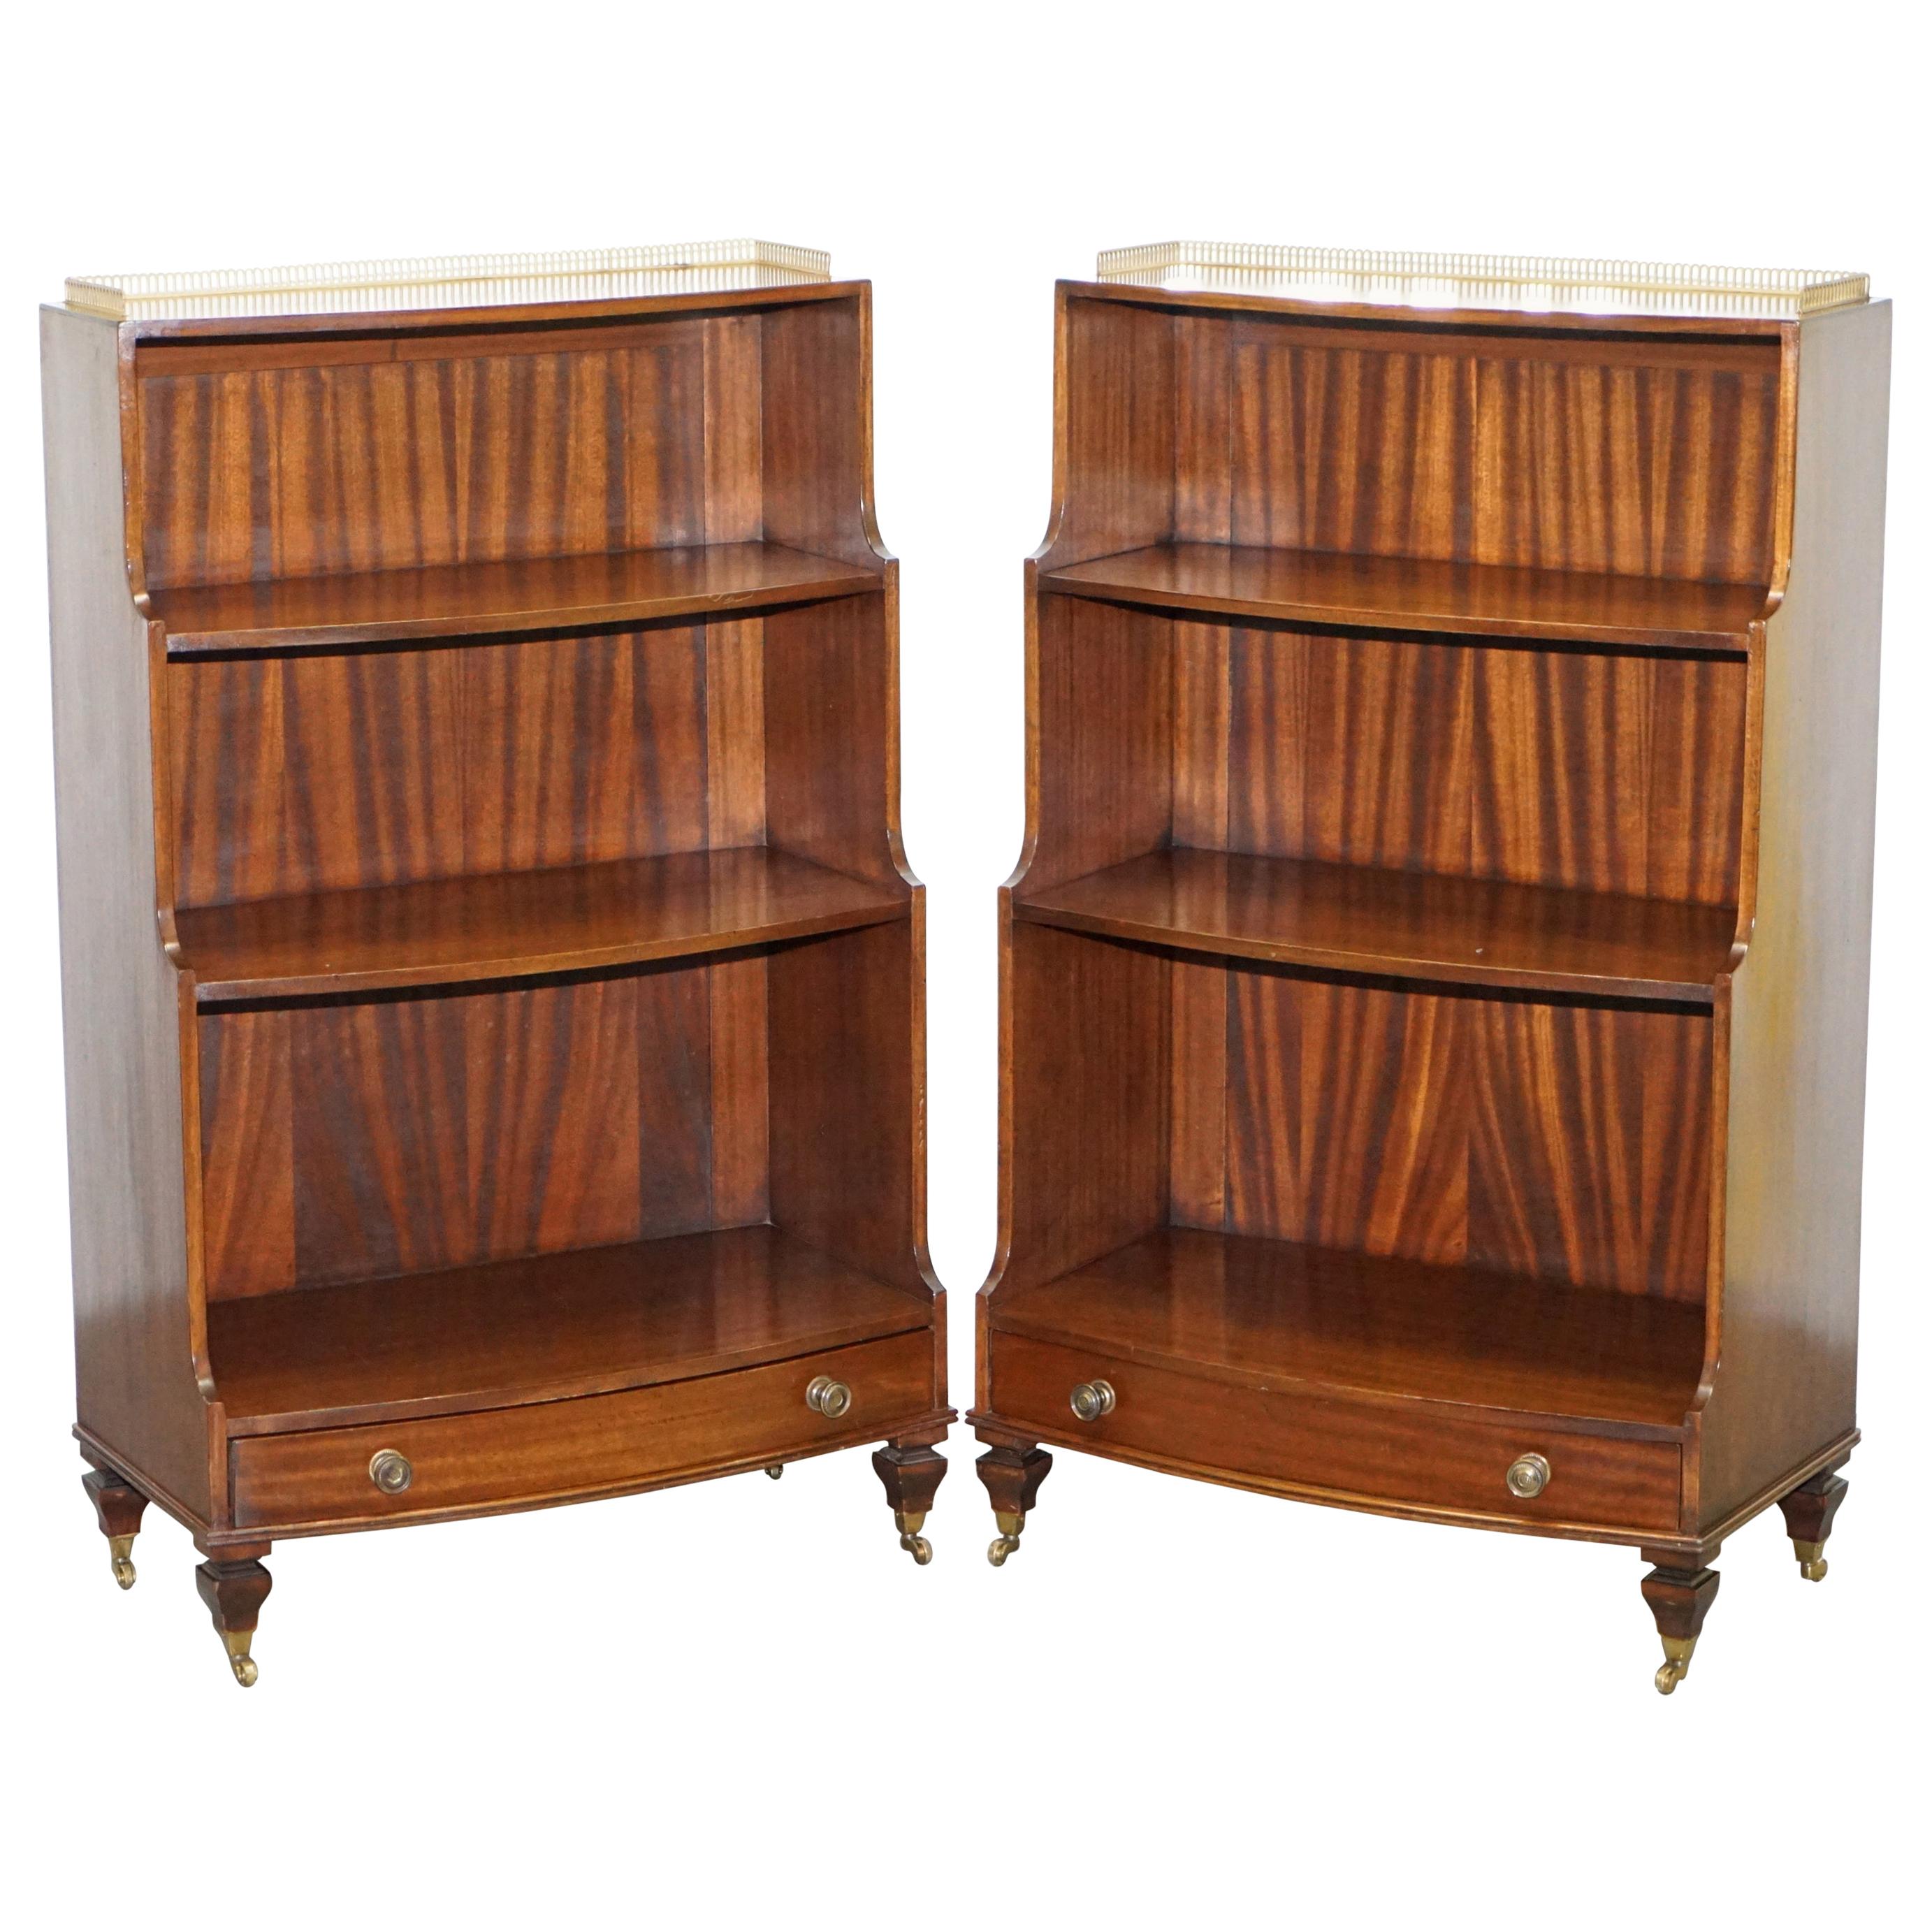 Rare Pair of Dwarf Waterfall Open Bookcases Brass Gallery Rails Castors Drawers For Sale